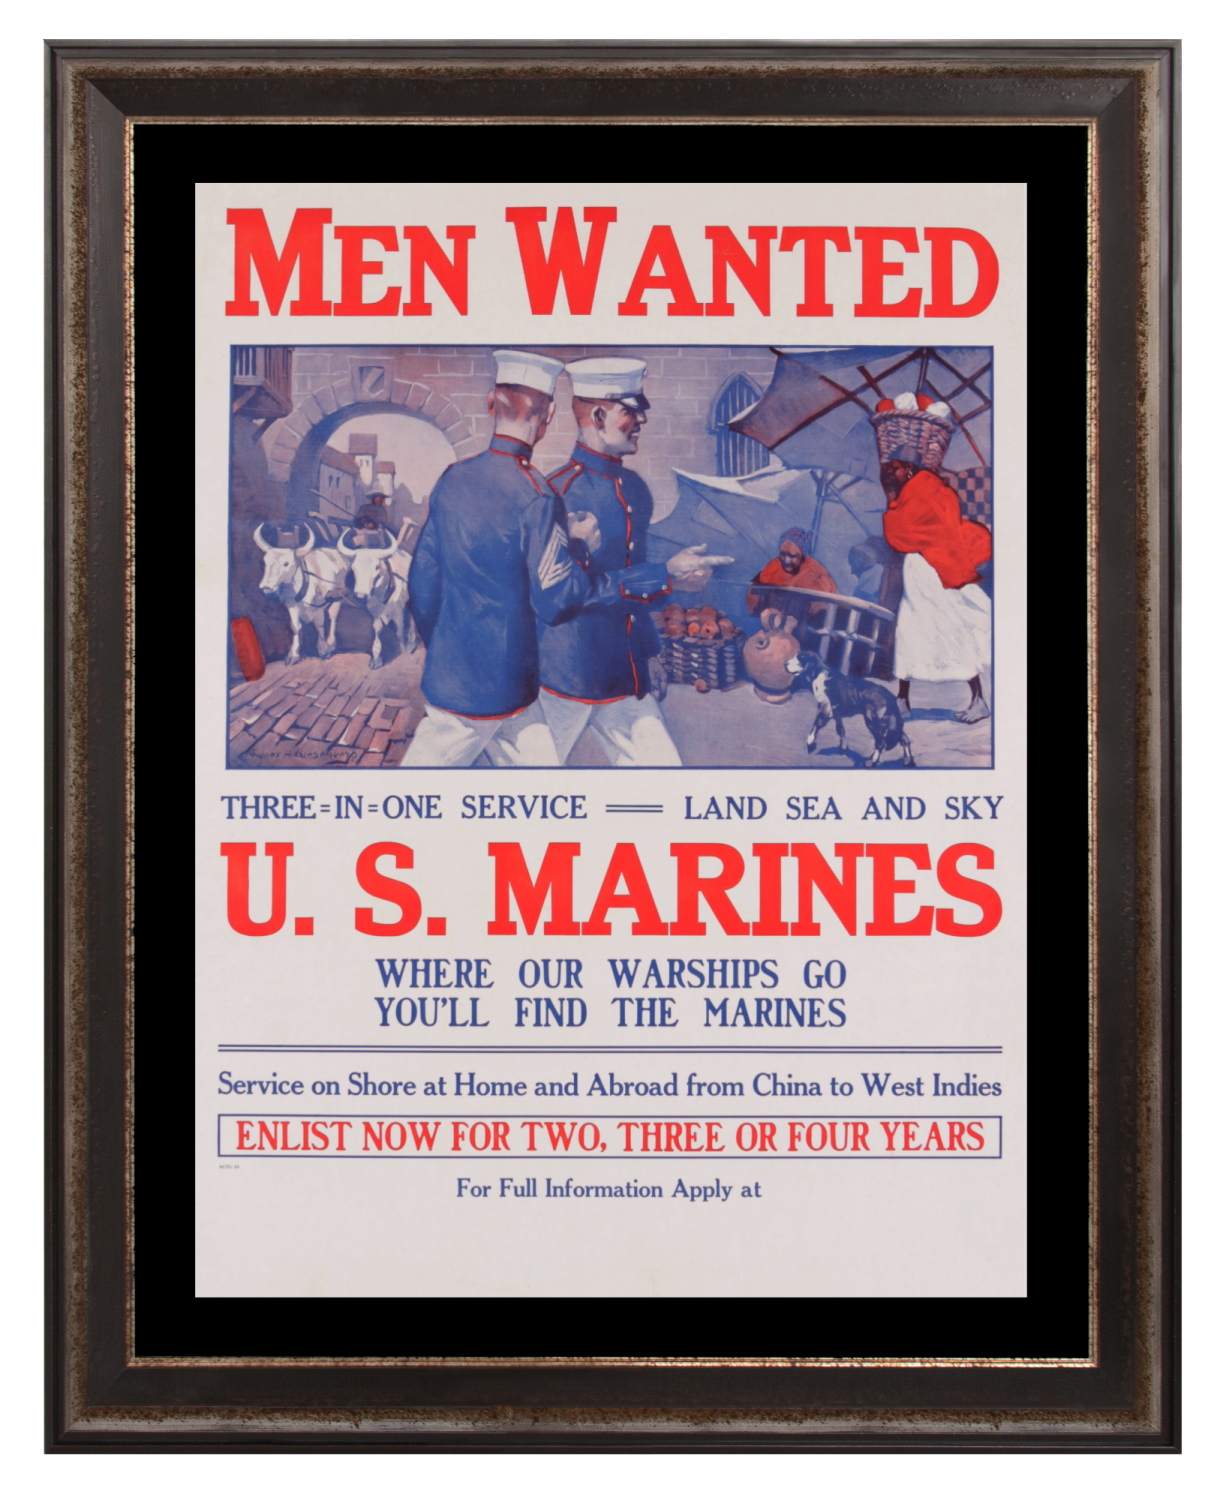 EXTRAORDINARY MARINE CORPS RECRUITMENT POSTER BY SIDNEY RIESENBERG (1885-1971), WITH SHARPLY APPOINTED OFFICERS STROLLING IN AN EXOTIC LOCAL, LIKELY DERNA OR MARRAKESH (i.e., “THE SHORES OF TRIPOLI”), circa 1913-1918